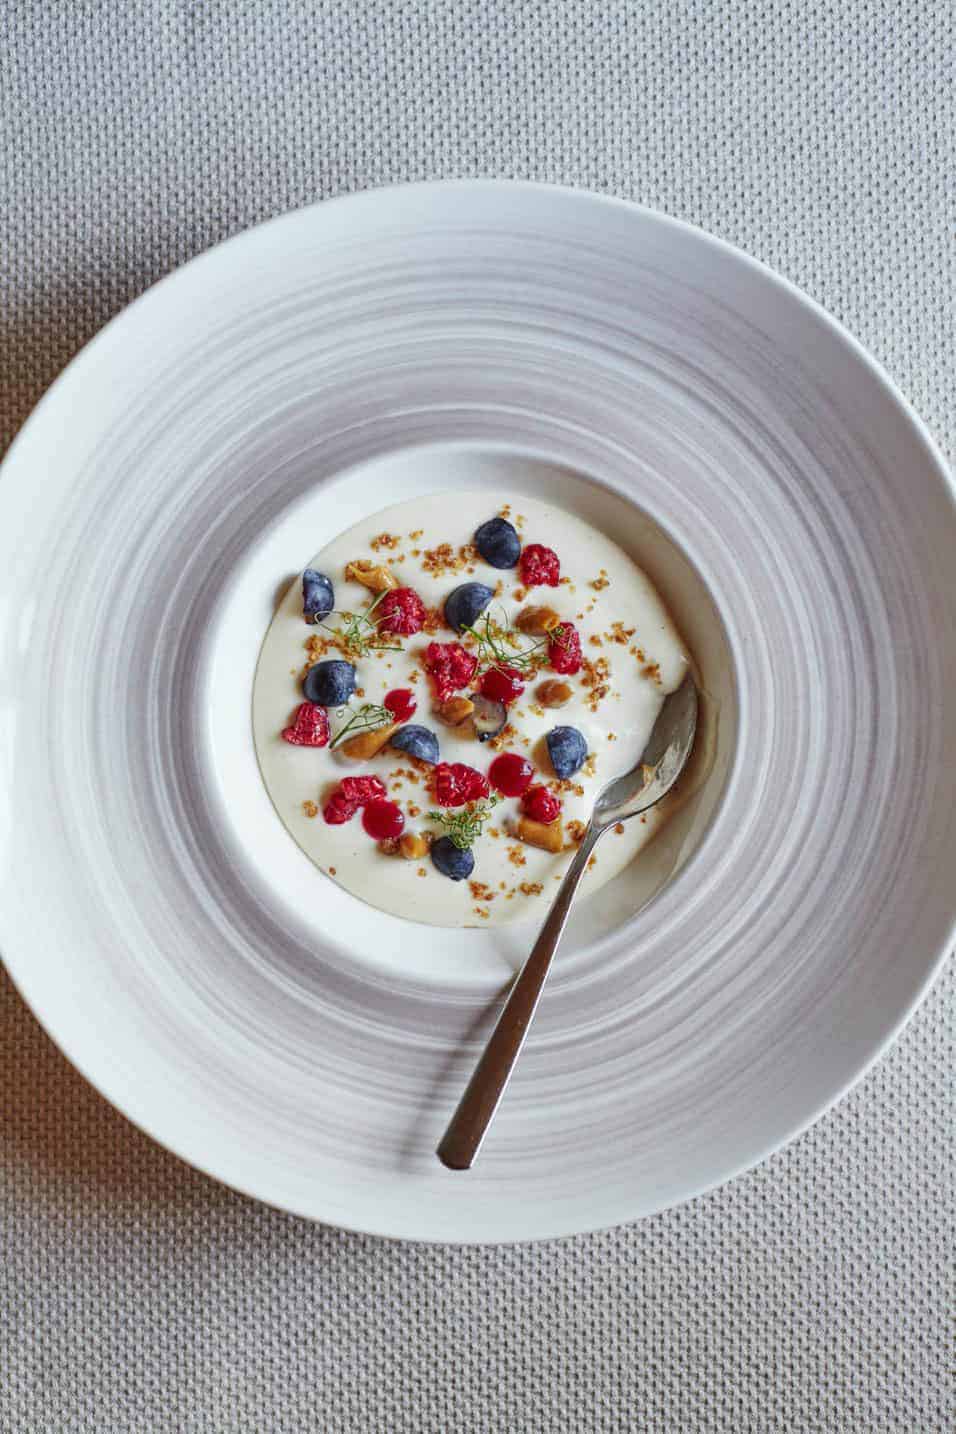 Skyr dessert with oat crumble and berries made by the chefs at Hotel Rangá.